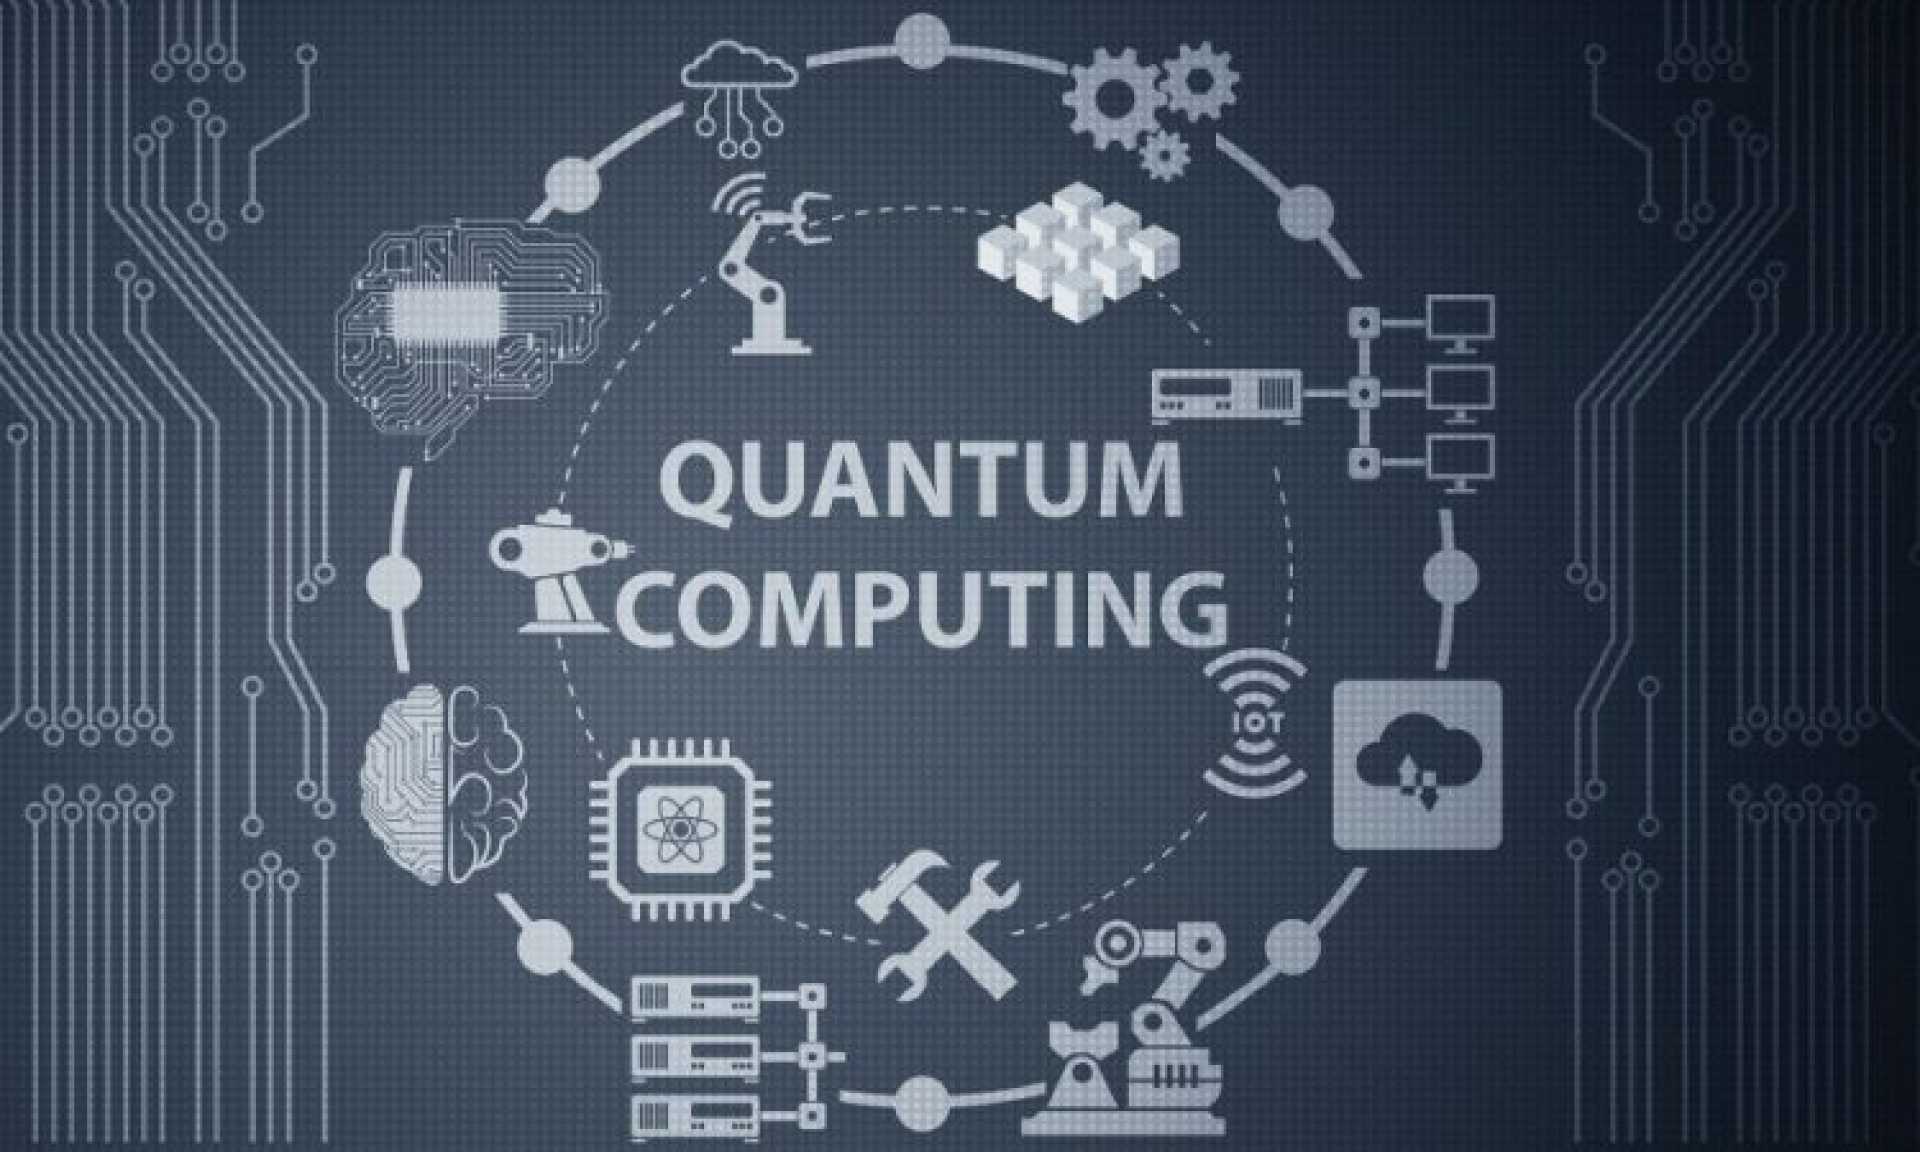 What Are Quantum Computers?